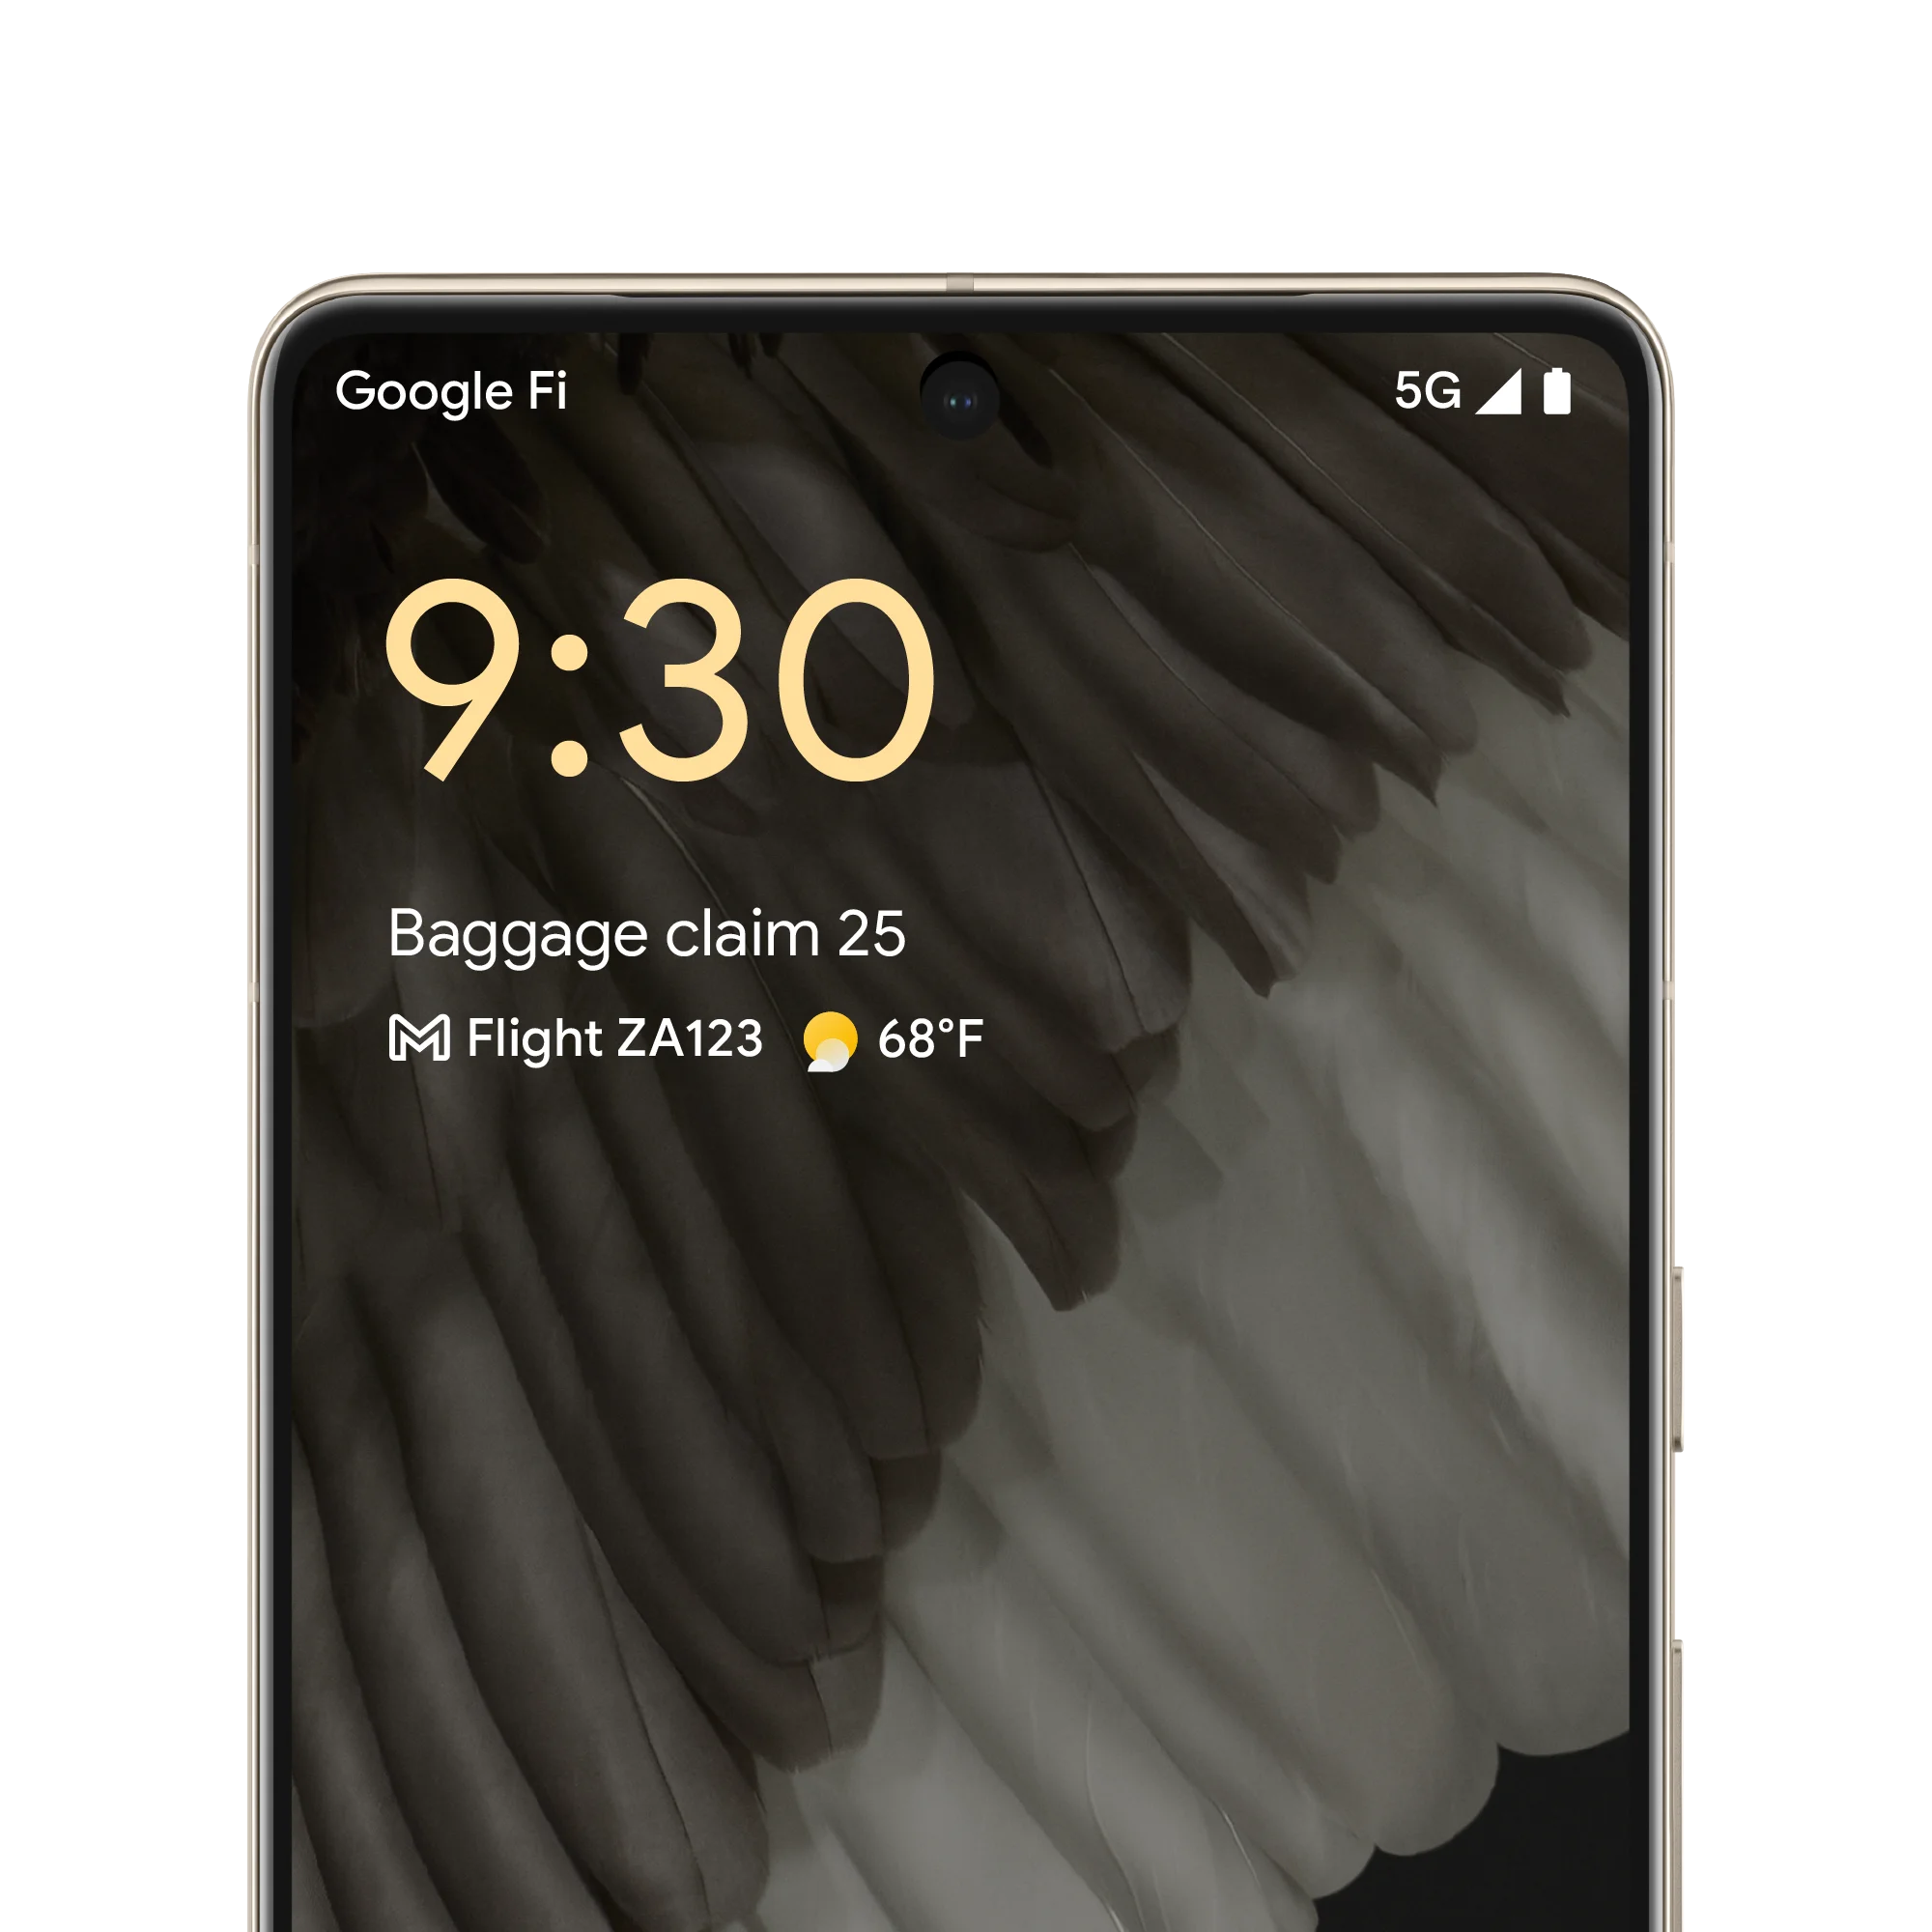 An image of a smartphone with information on baggage claim